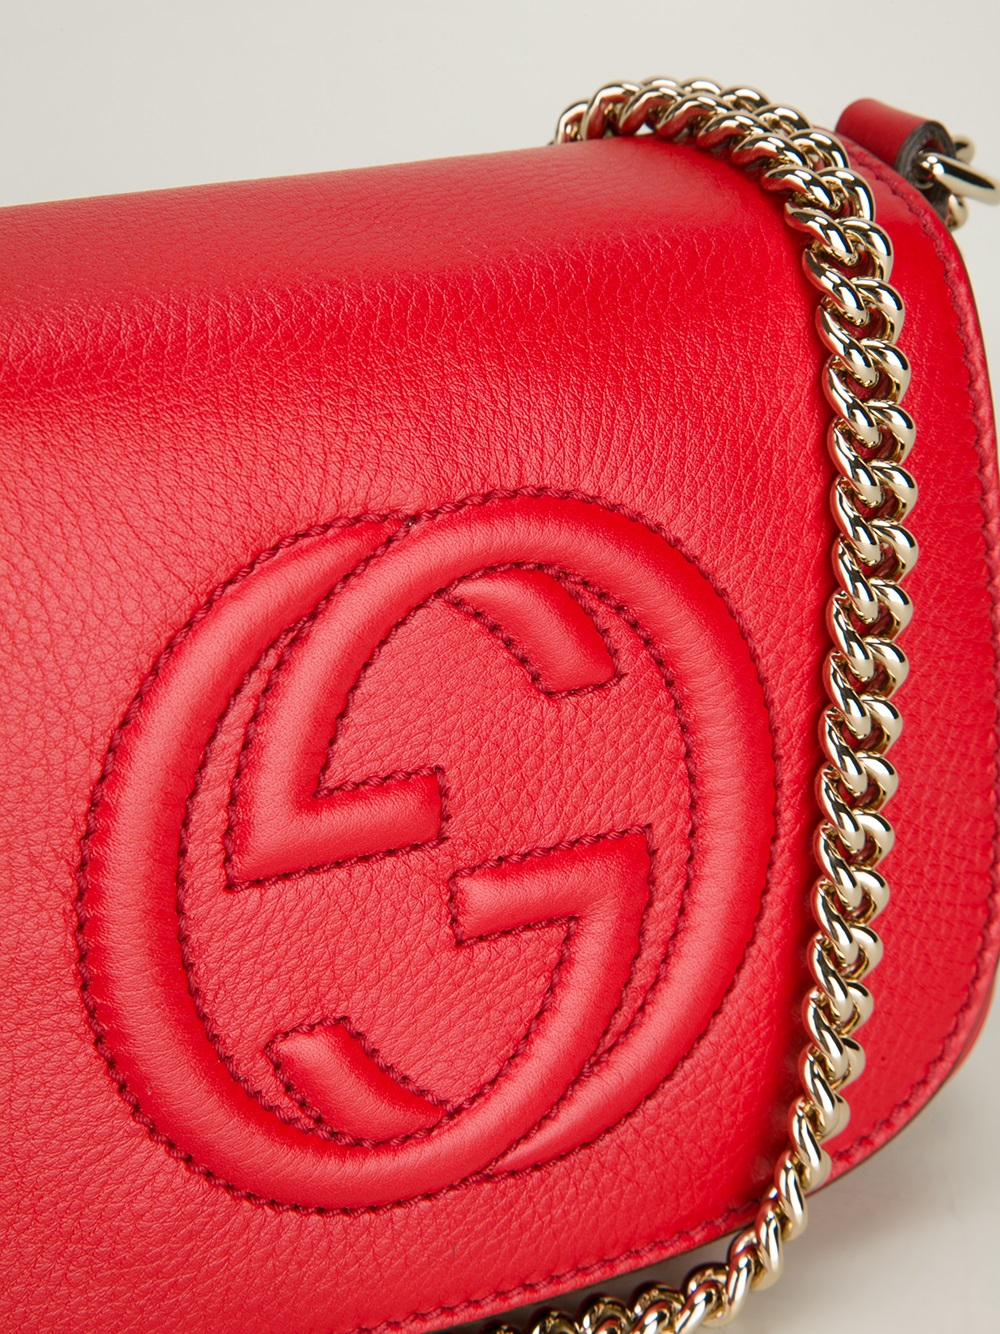 Gucci Soho Leather Shoulder Bag in Red - Lyst